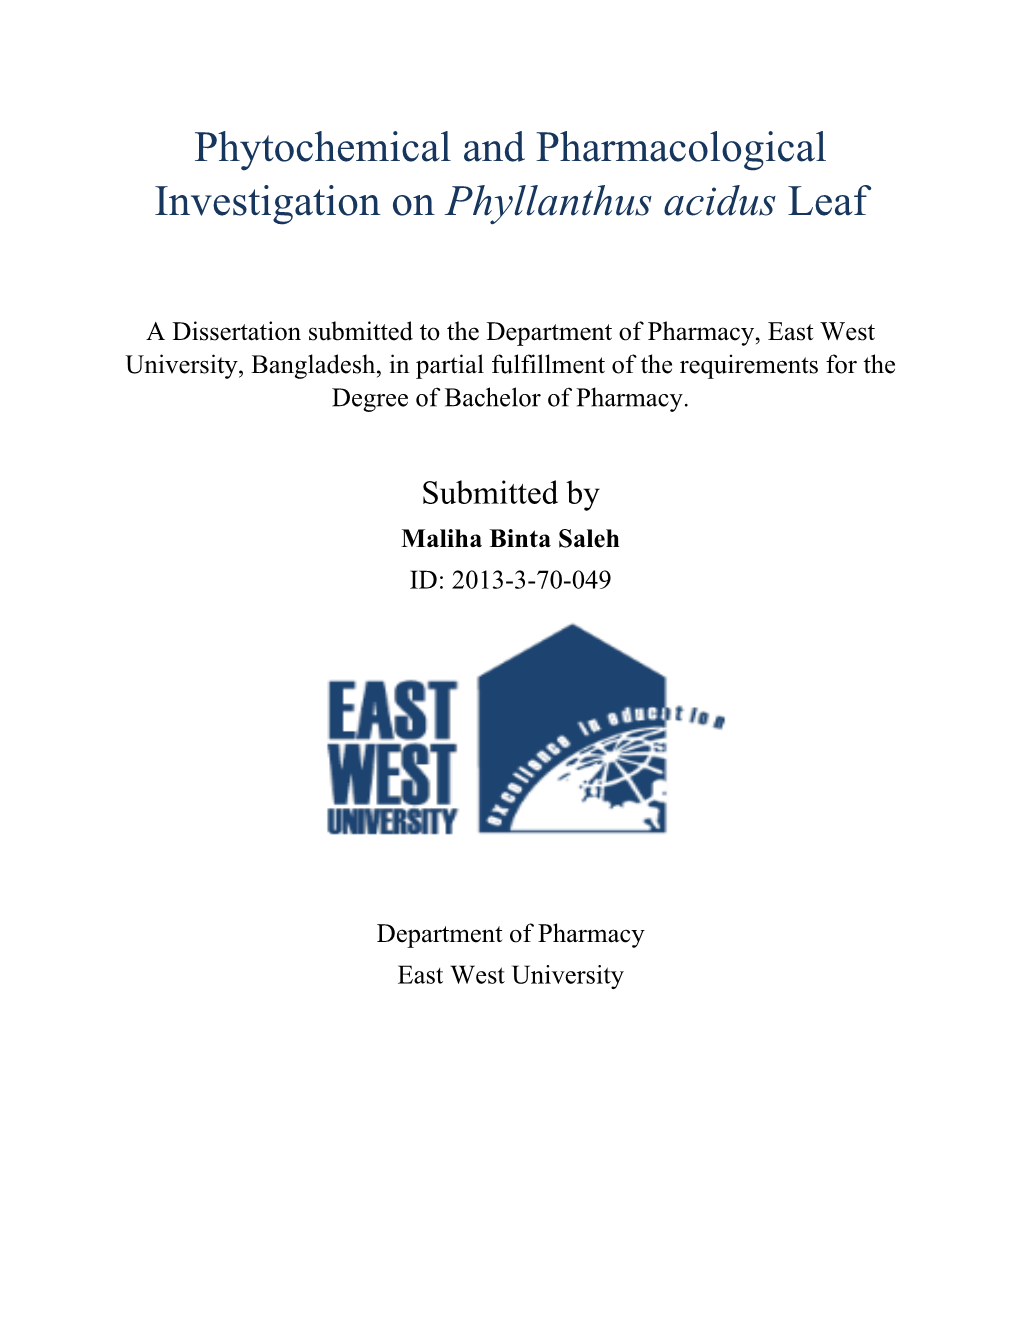 Phytochemical and Pharmacological Investigation on Phyllanthus Acidus Leaf